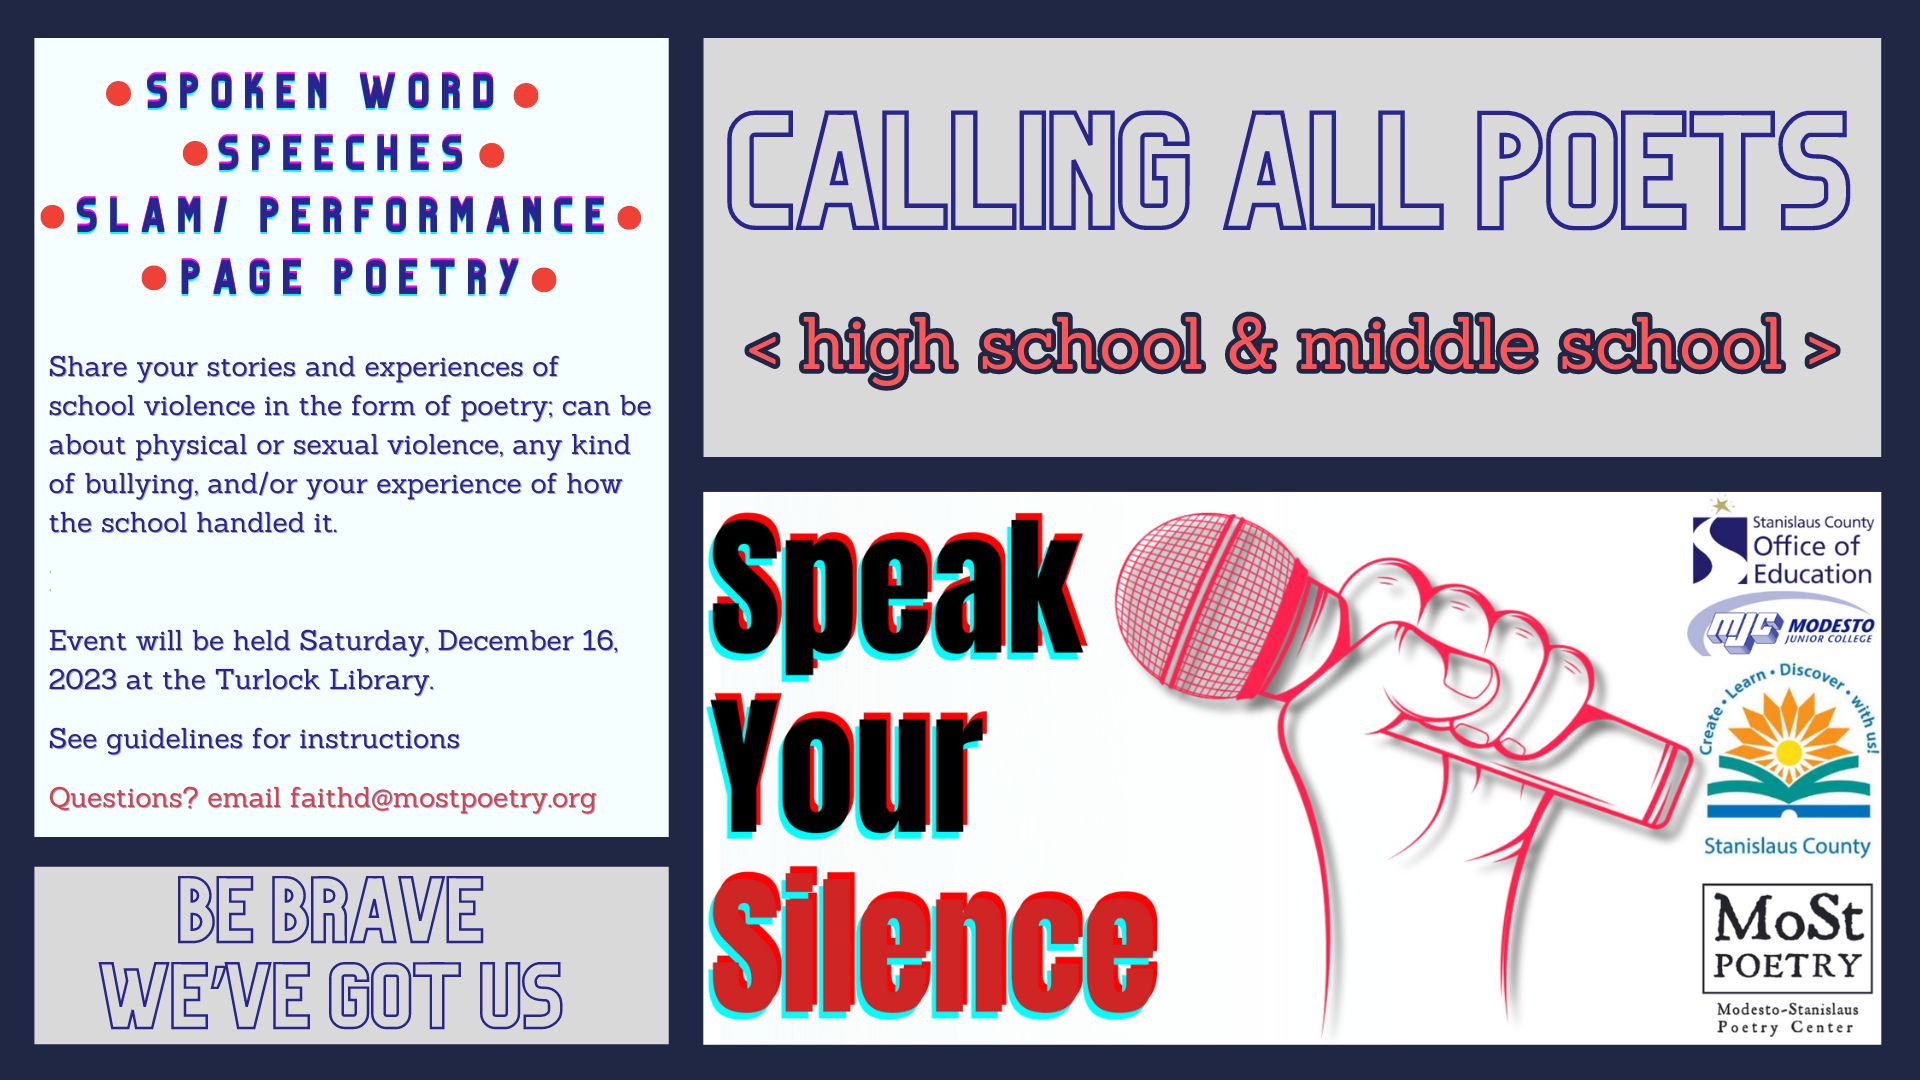 Calling All Poets, middle and high schoolers for the Speak Your Silence event on Dec. 16 at the Turlock Library.